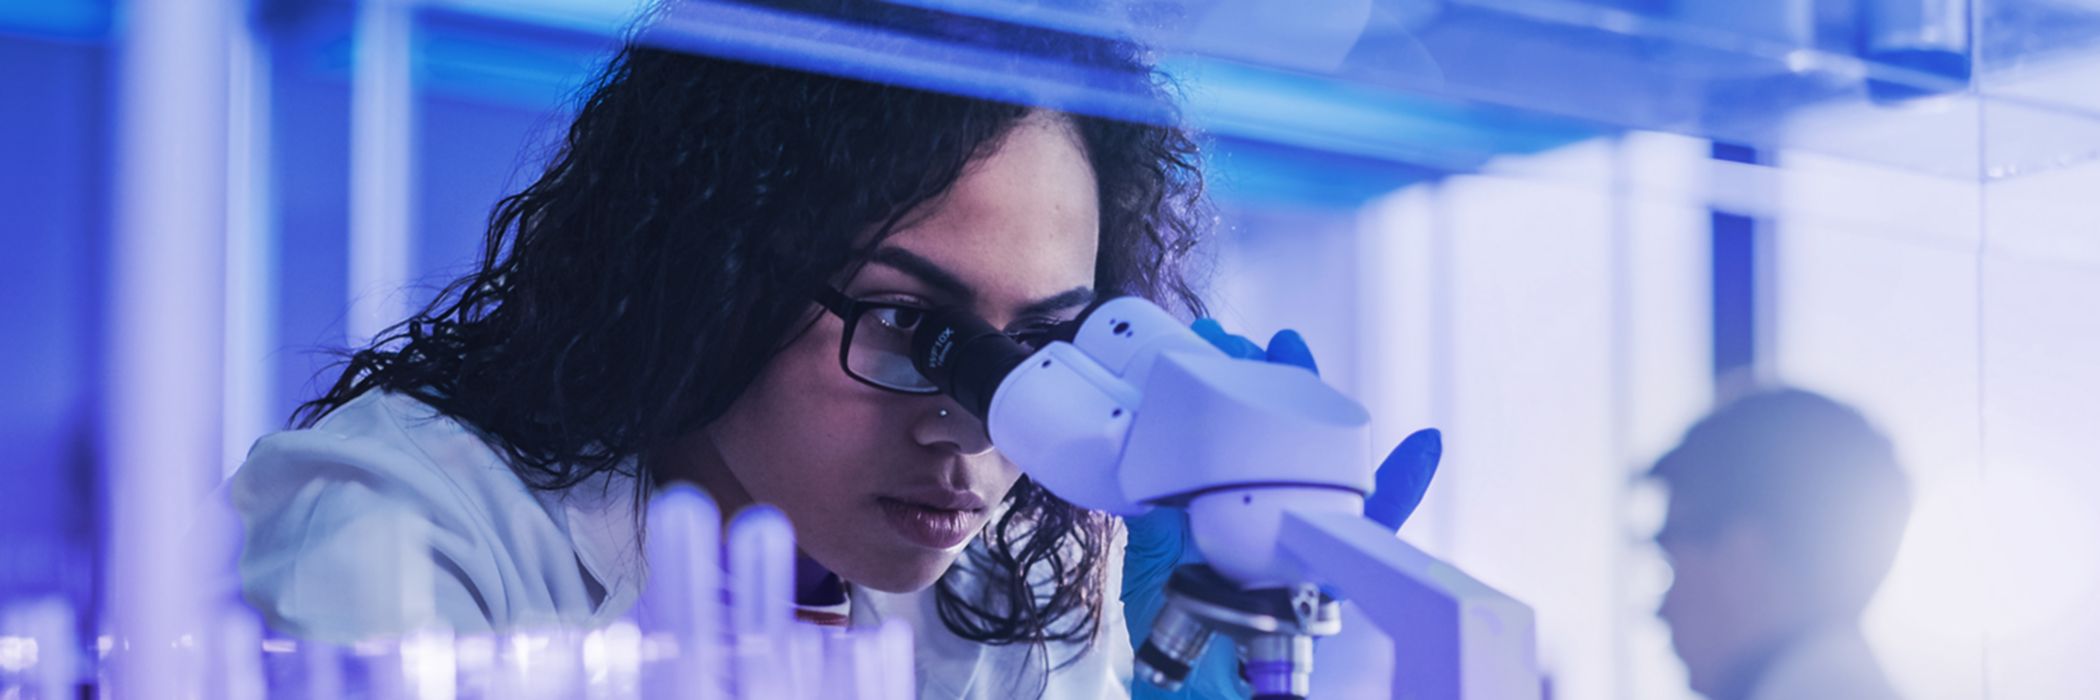 Woman using microscope in lab - Life sciences